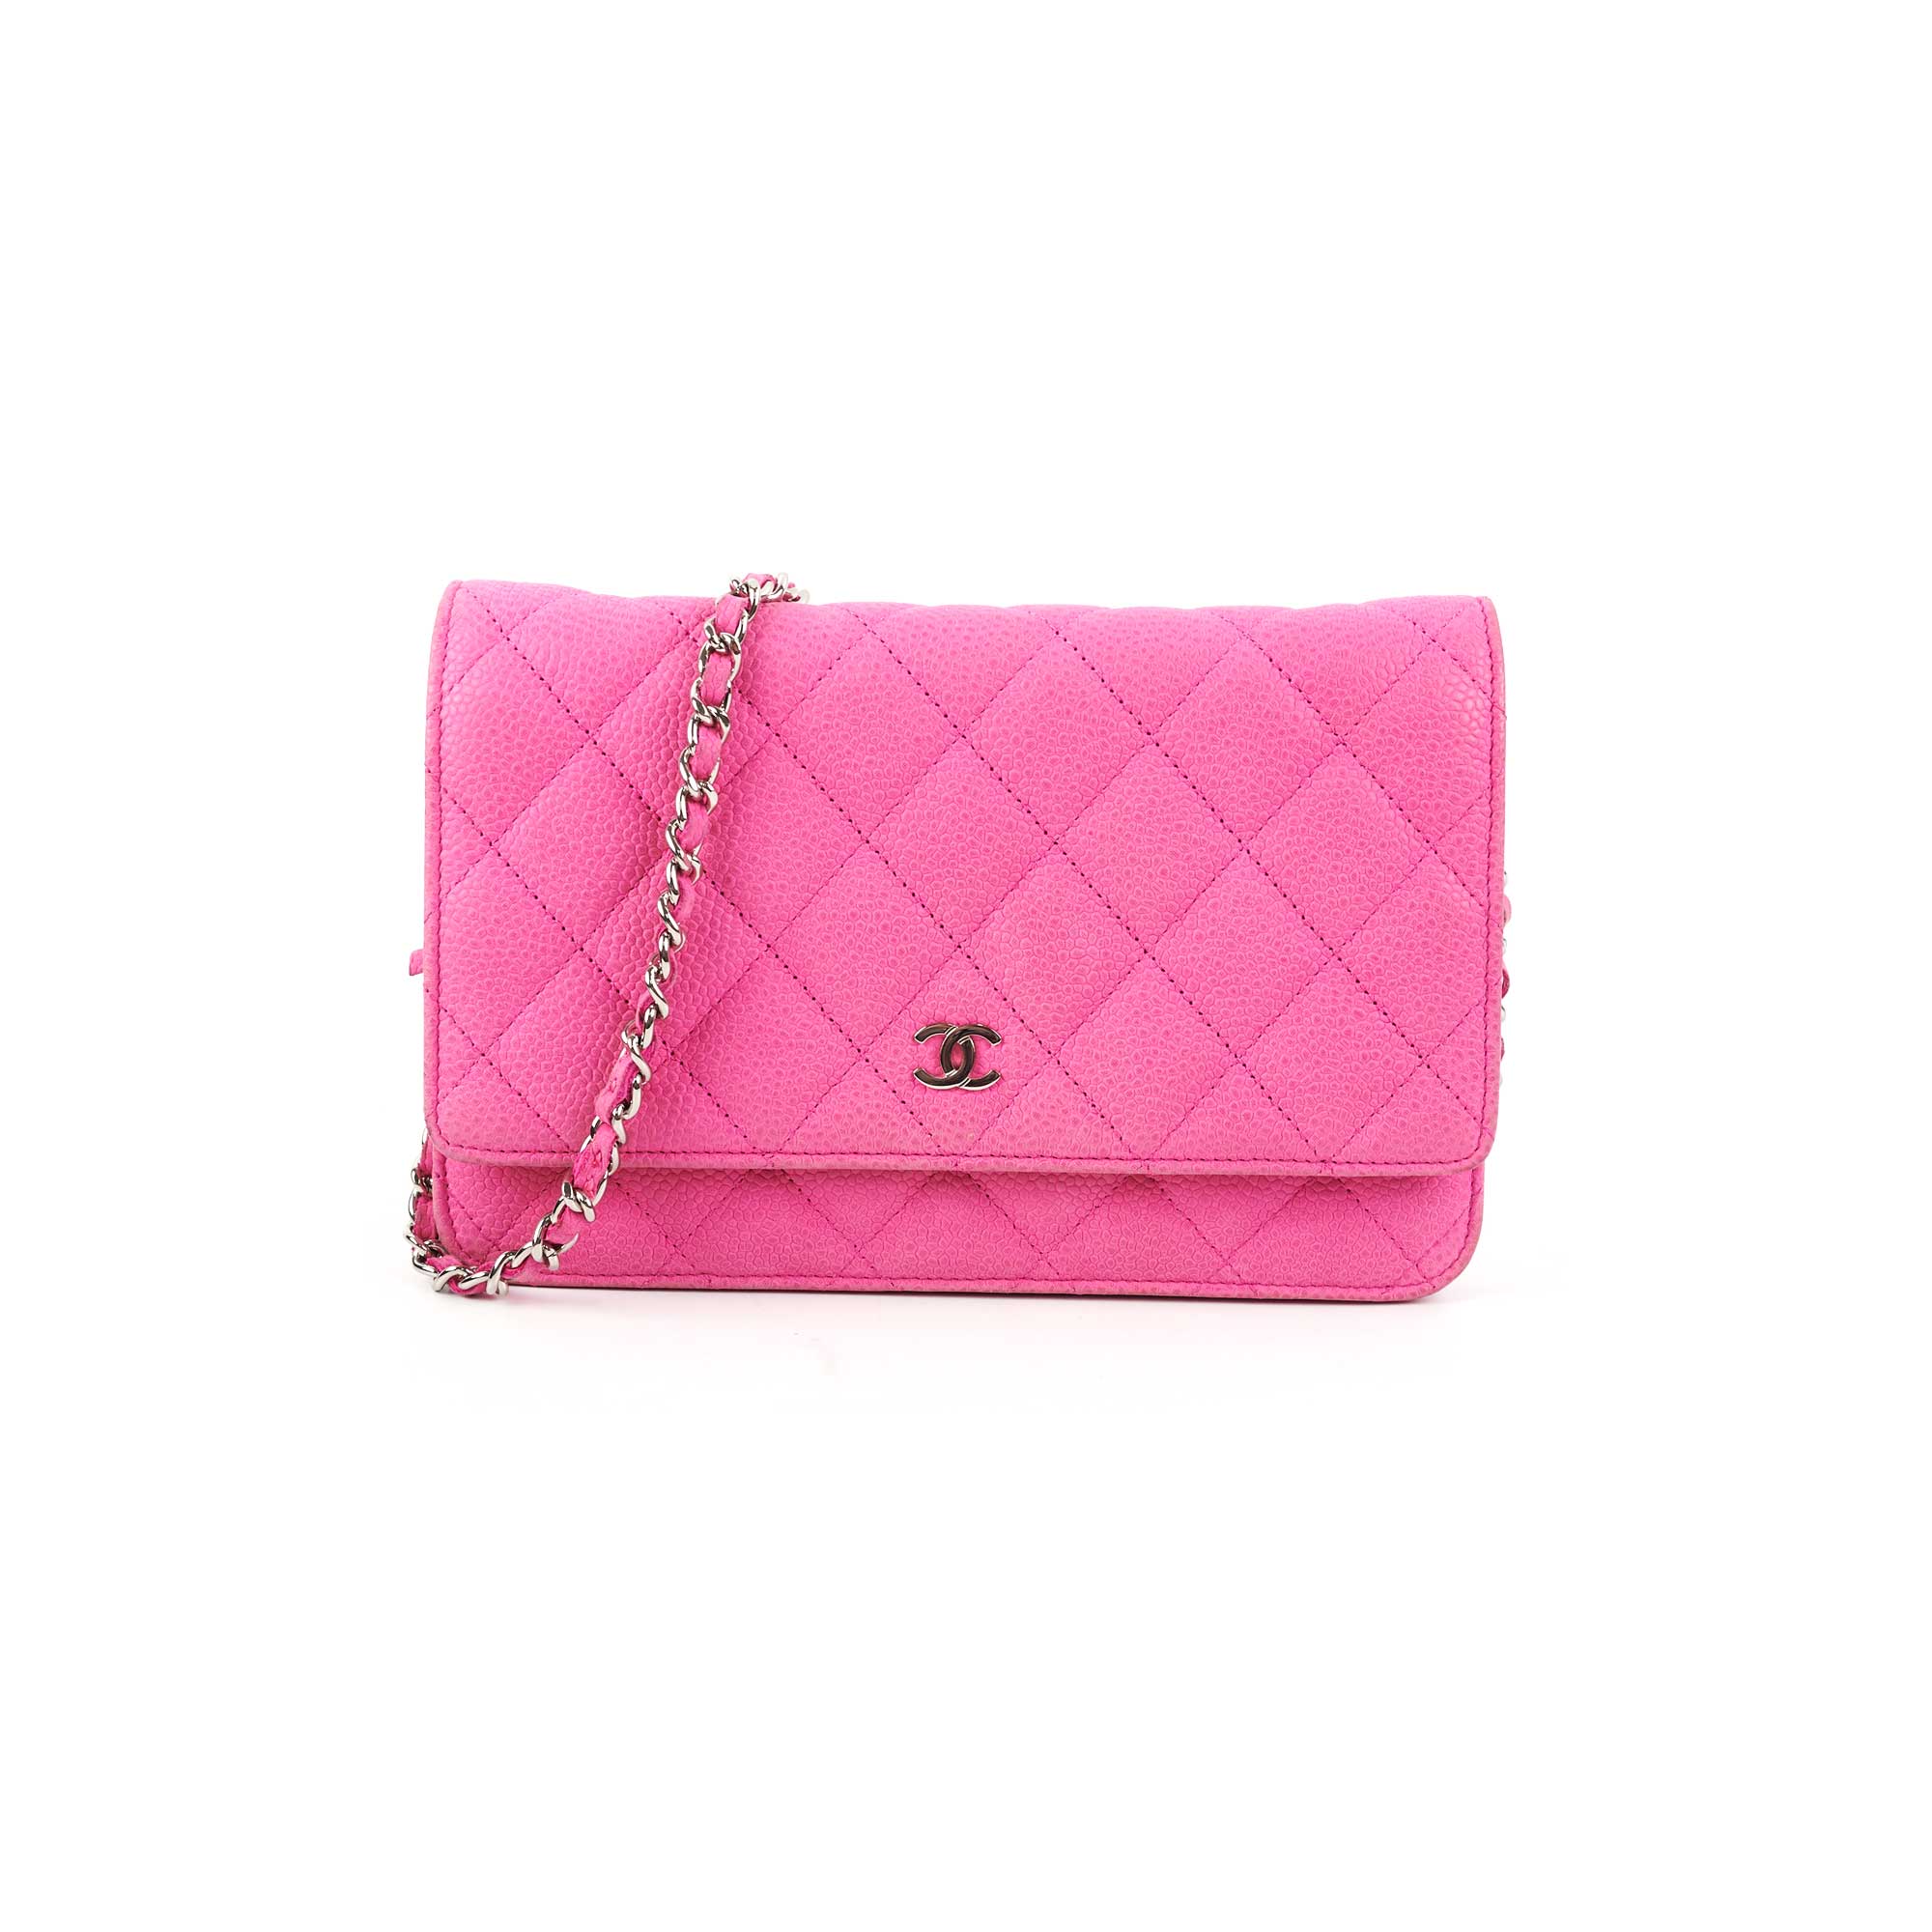 Chanel Pink Caviar Compact Wallet - THE PURSE AFFAIR